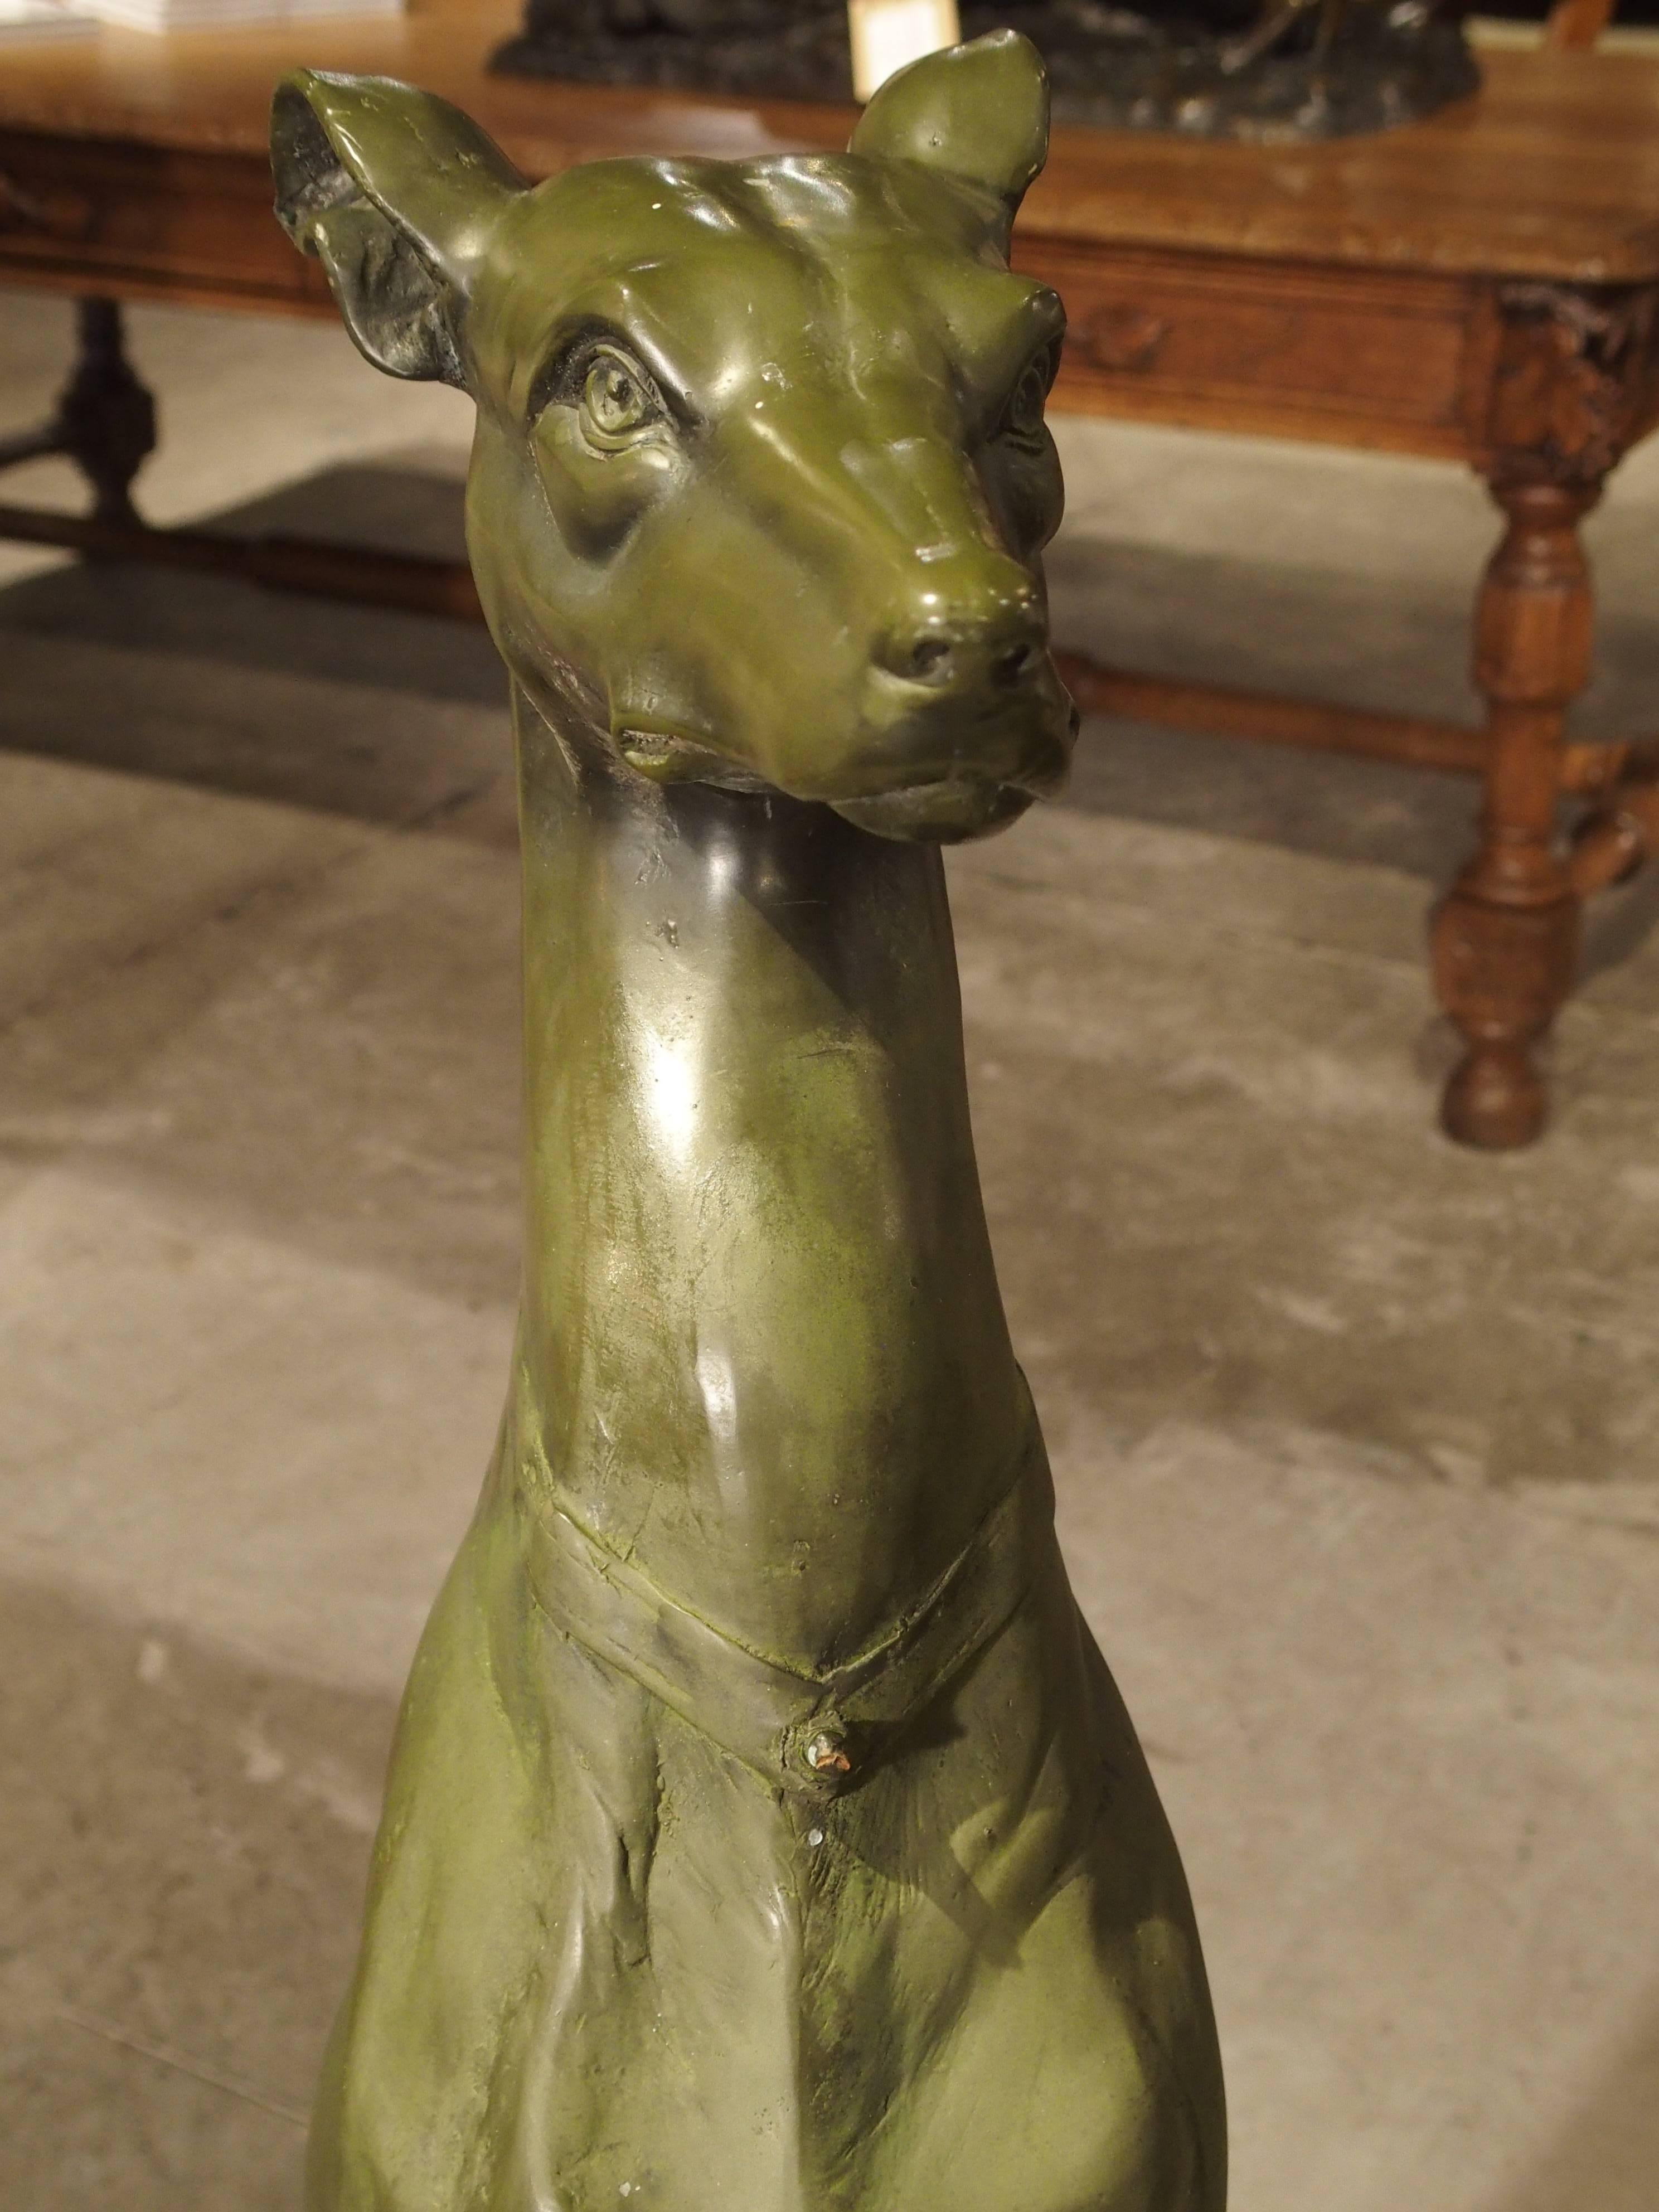 These wonderful metal dogs are seated on stands of round stone, and they are after the French sculptor, Antoine Barye. They are a light green in color, mimicking bronze. Each dog (likely Whippets), rest upon octagonal pedestals with foliate motifs.